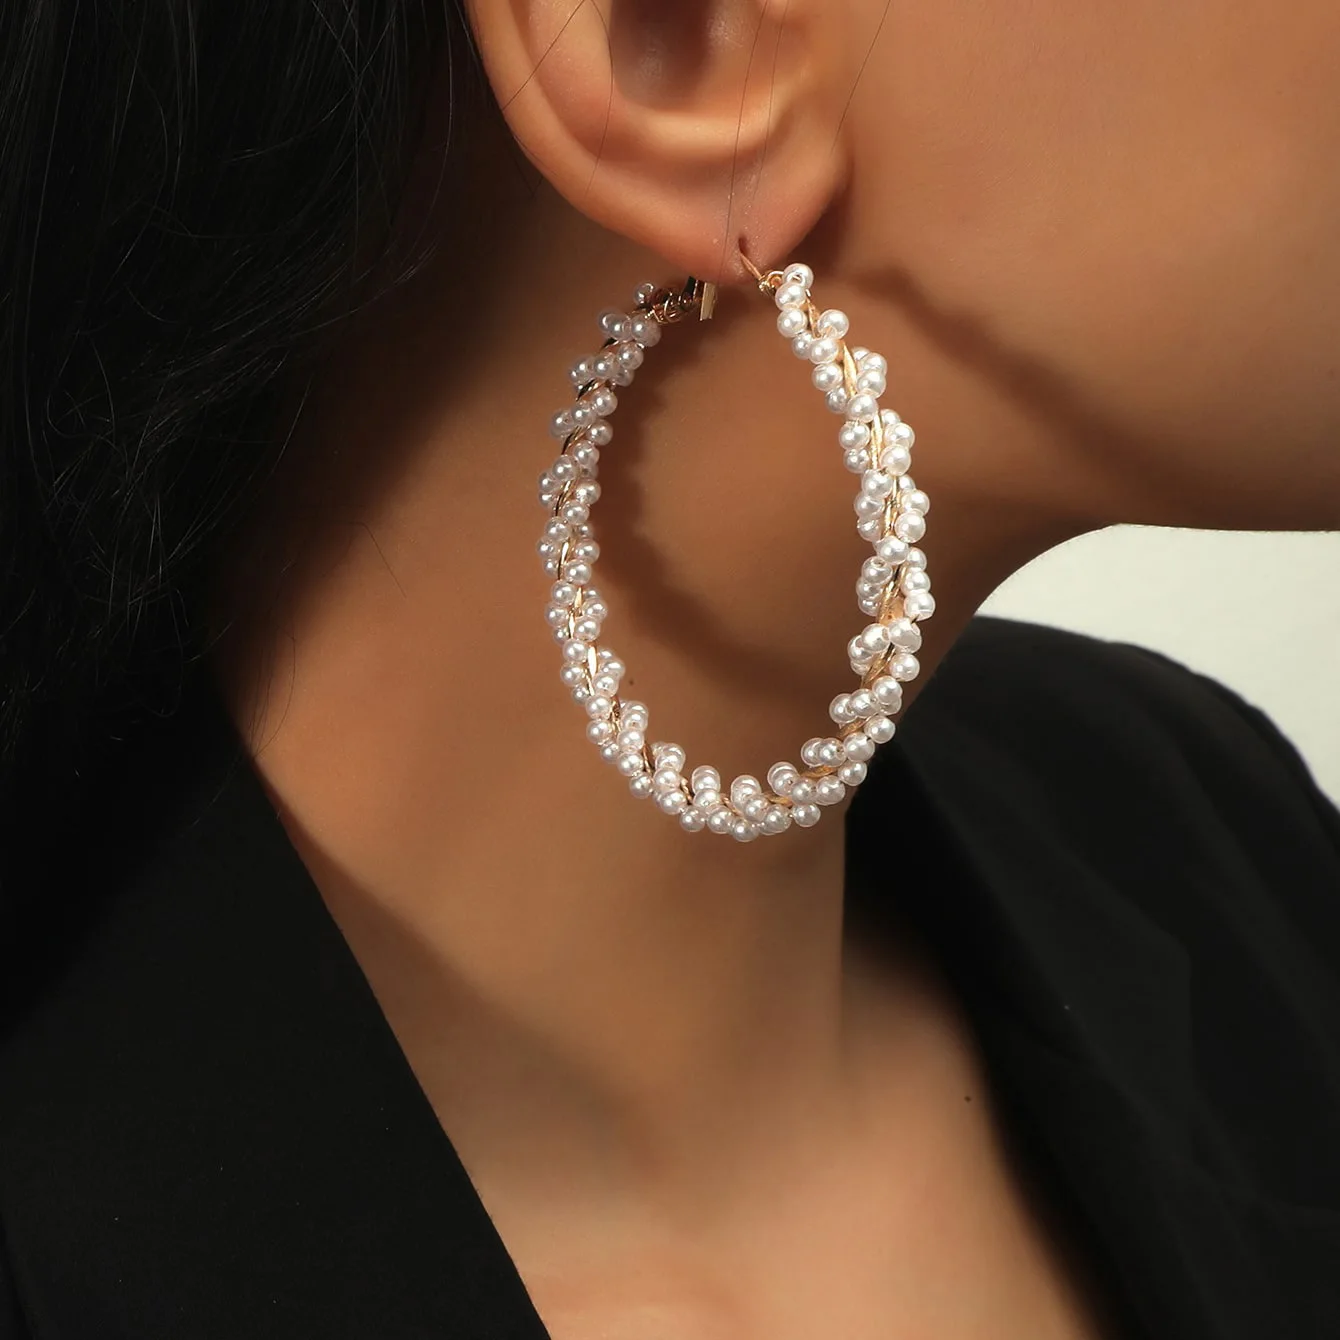 

20240New Imitation Pearls Big Round Dangle Earrings For Women Fashion Jewelry Exaggerated Ladys' Statement Earrings Accessories